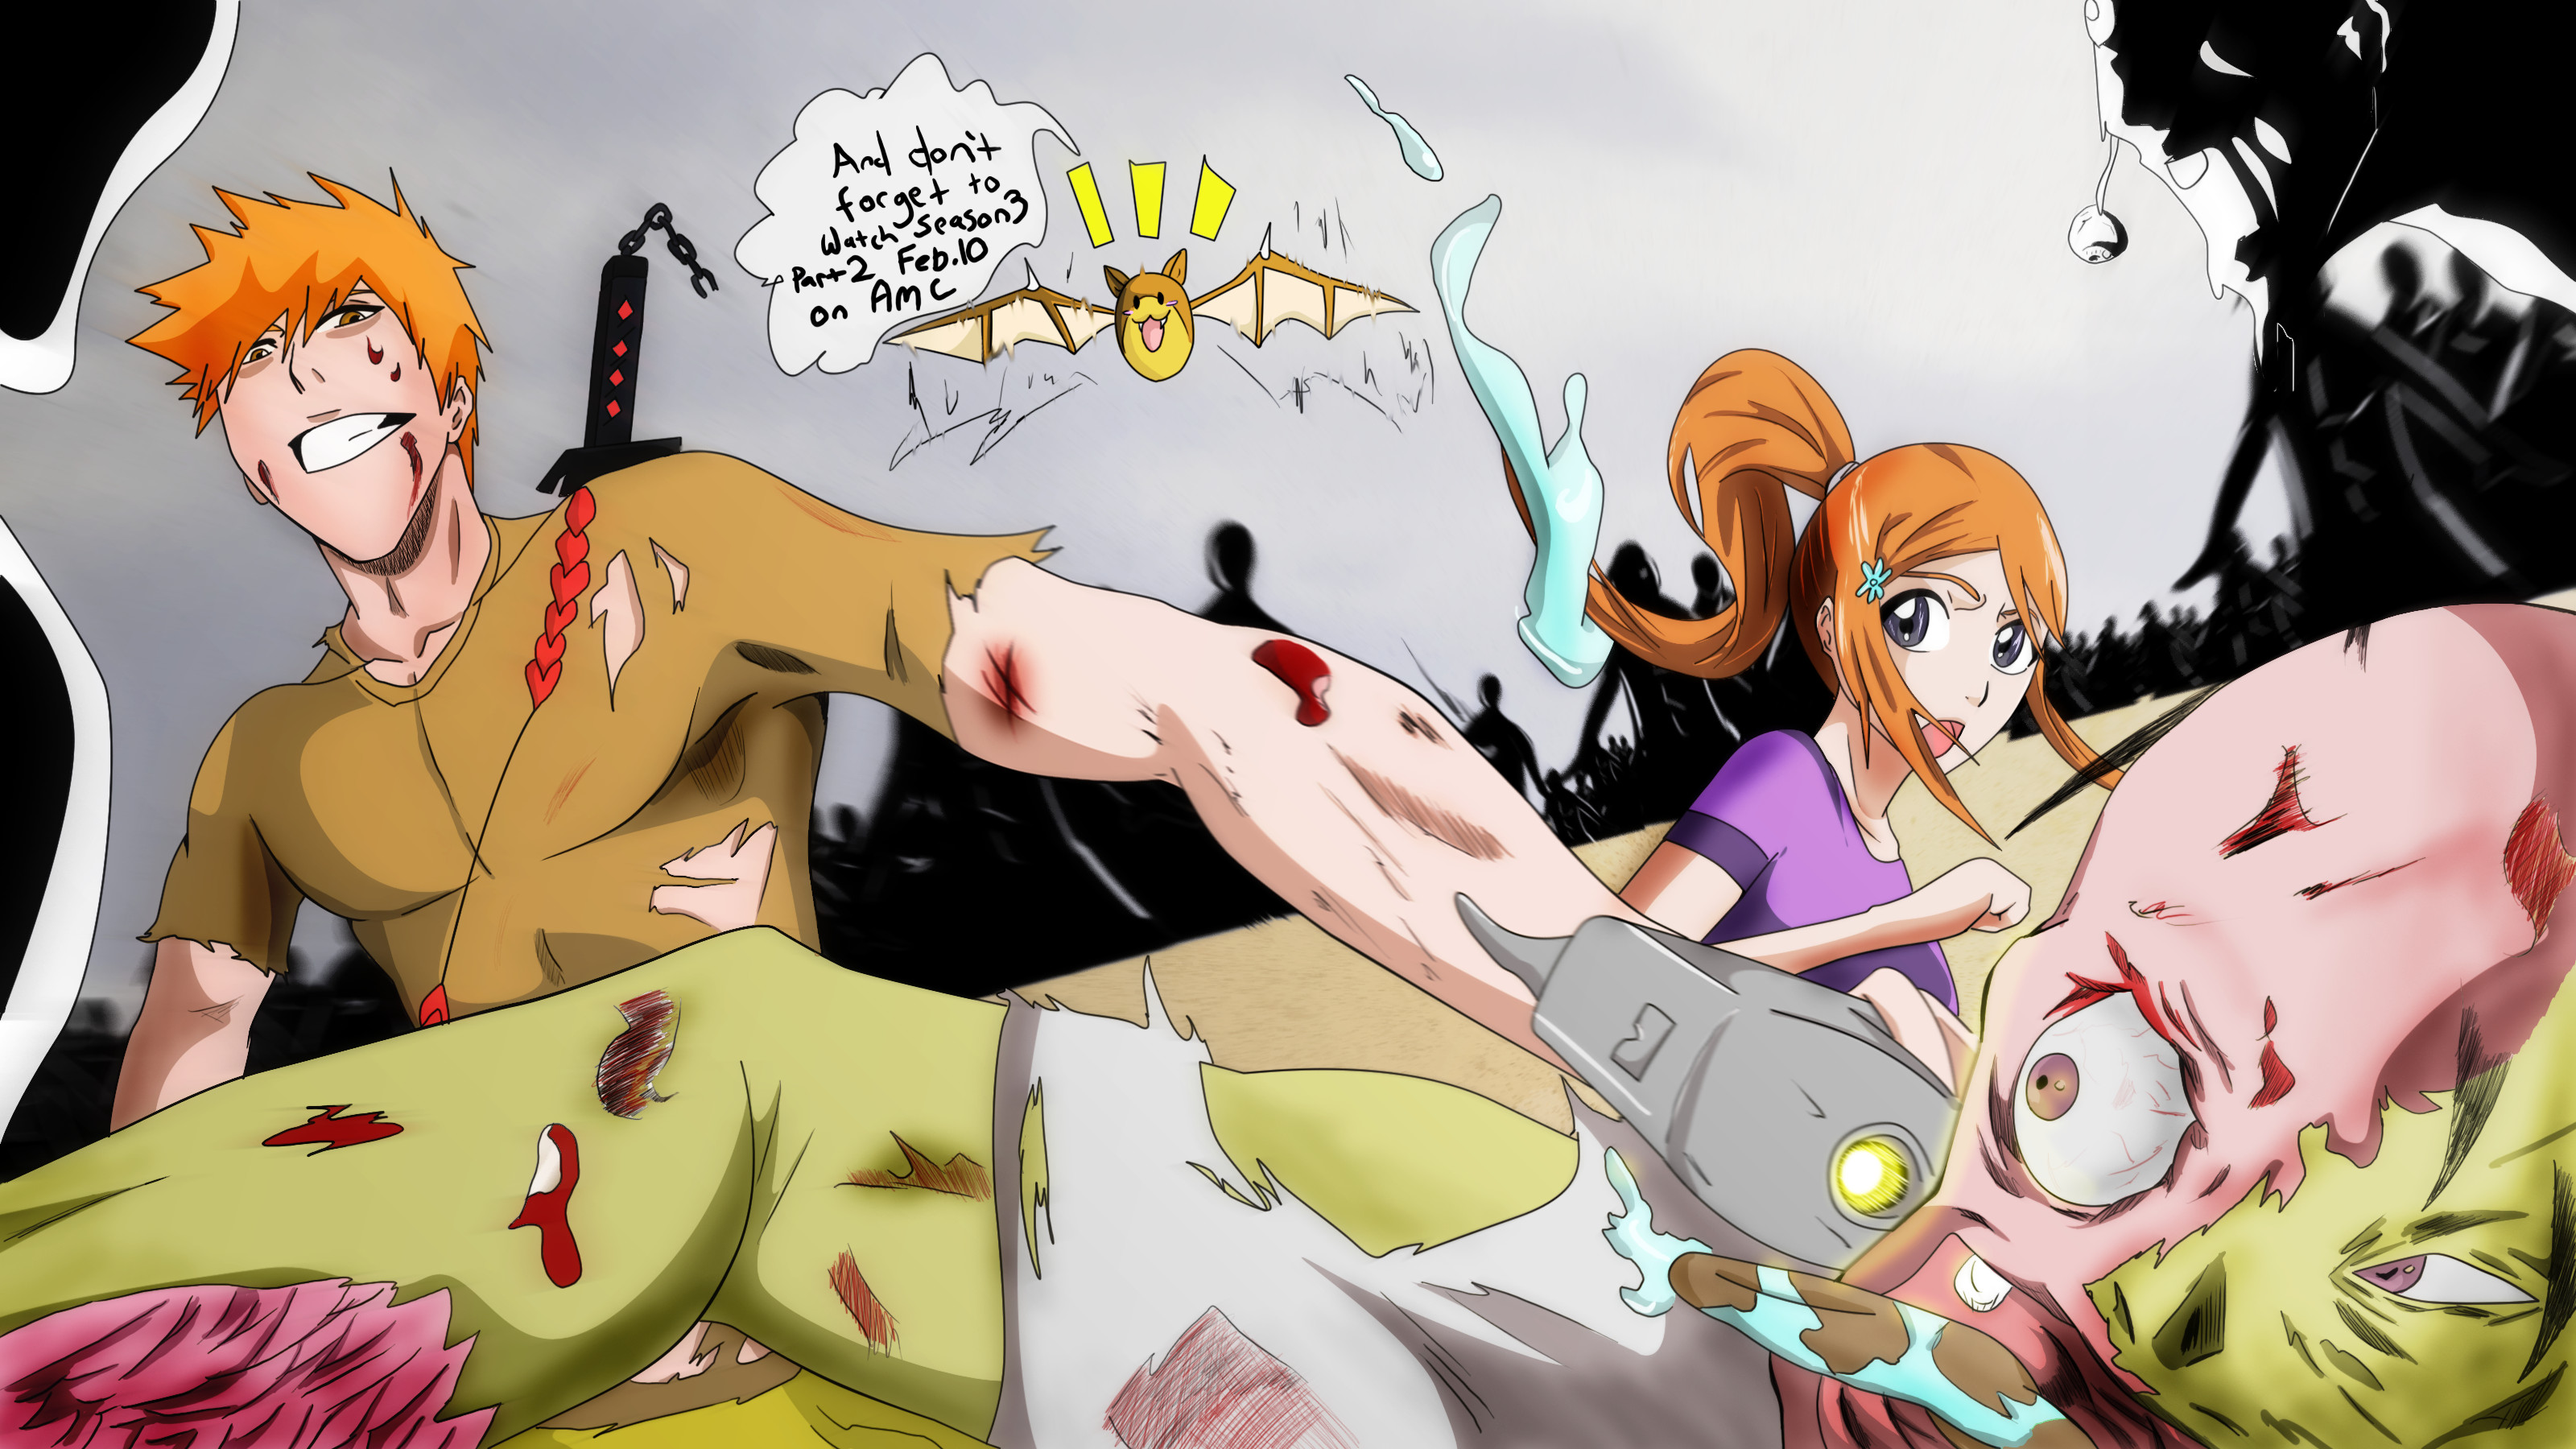 Orihime - Fight To Protect by EverlastingDarkness5 on DeviantArt